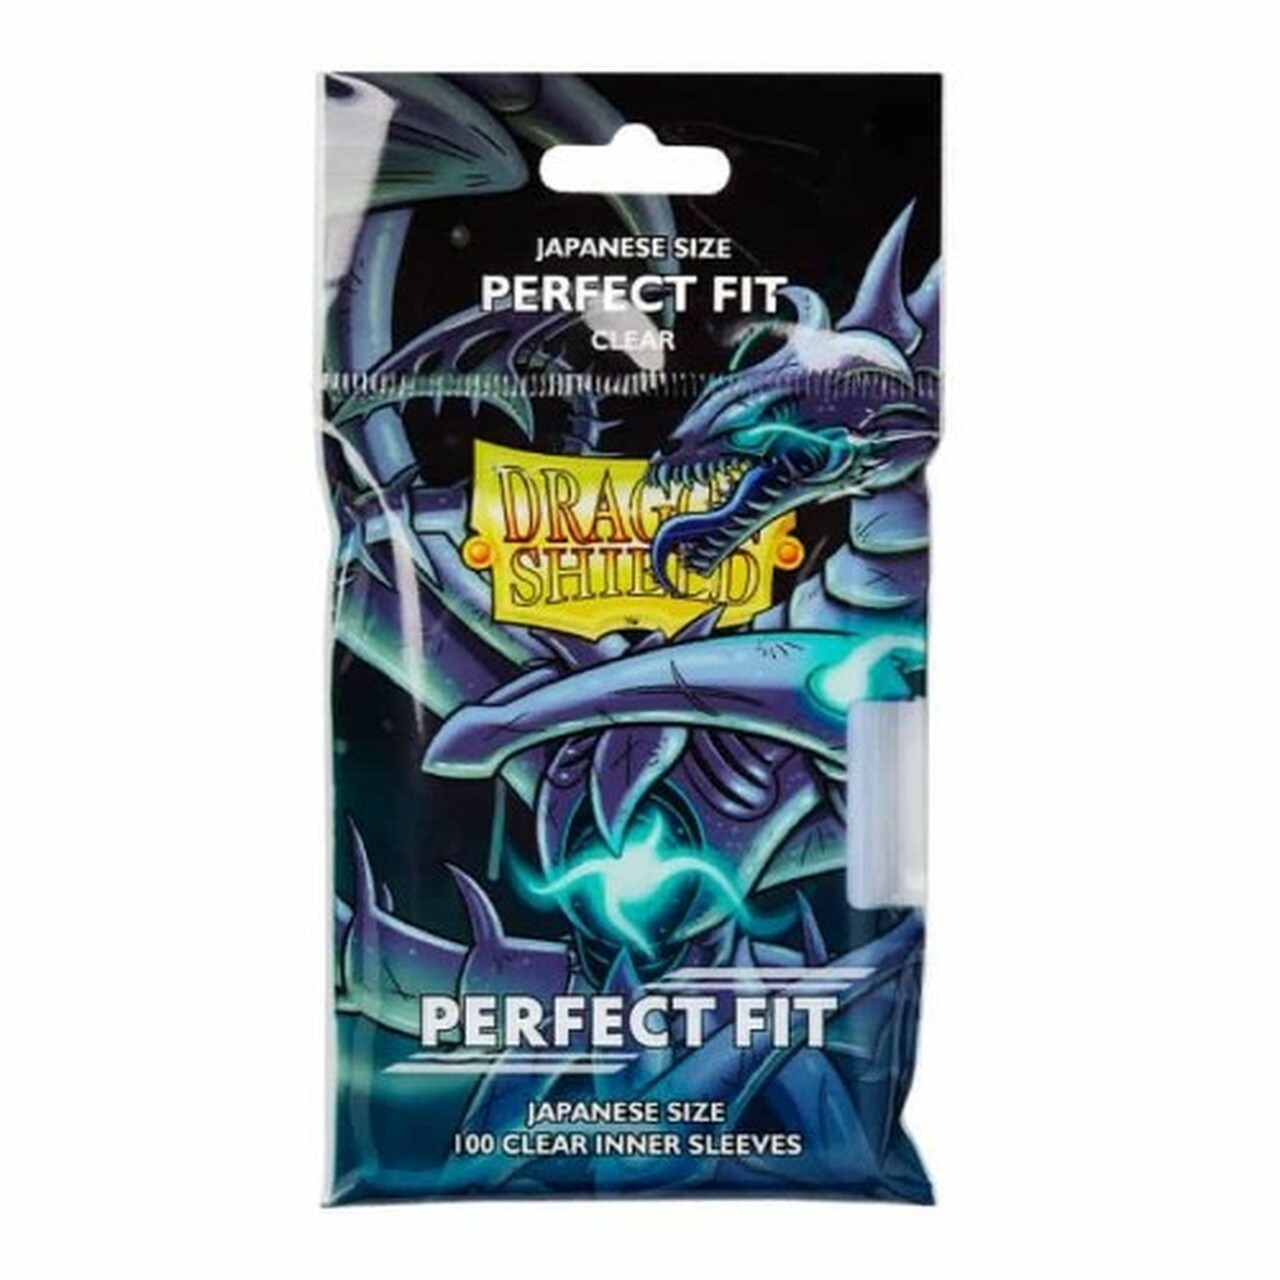 Dragon Shield Perfect Fit Japanese Size Sleeves 100-Count